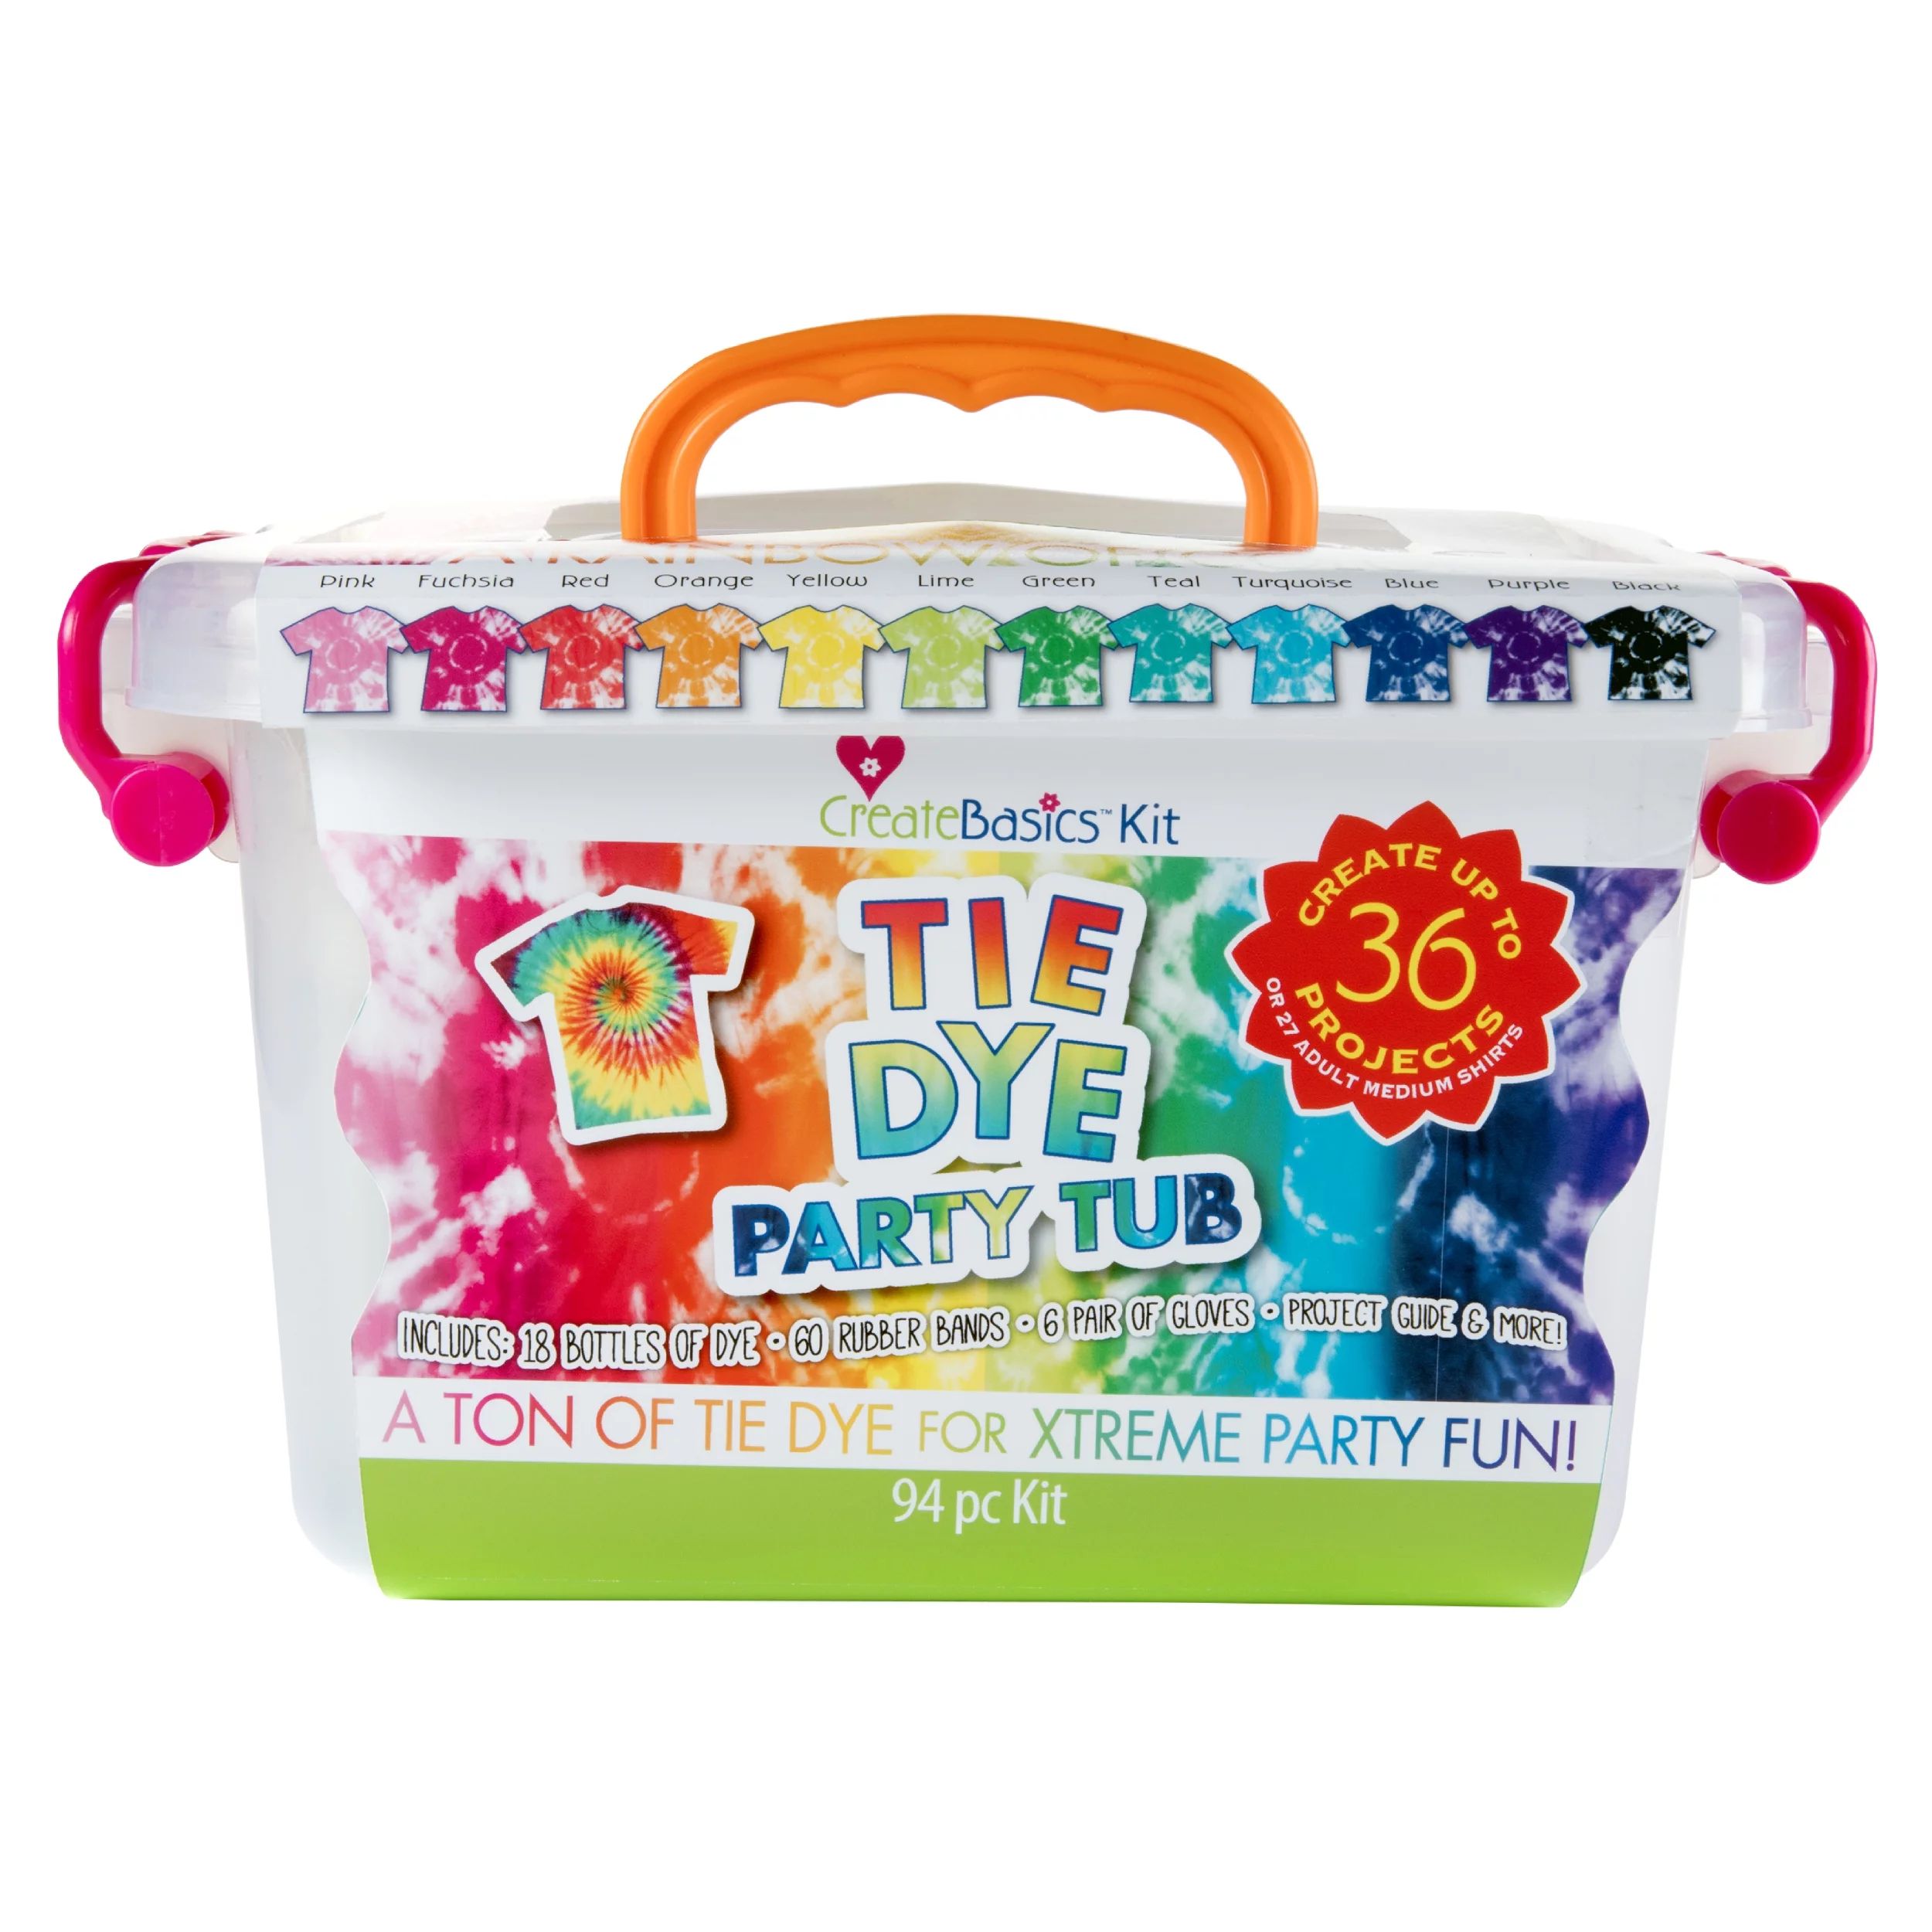 Create Basics Tie Dye Party Tub Kit - Rainbow Tie Dye Kit with 14 Color, 4 Refills, Gloves and Ru... | Walmart (US)